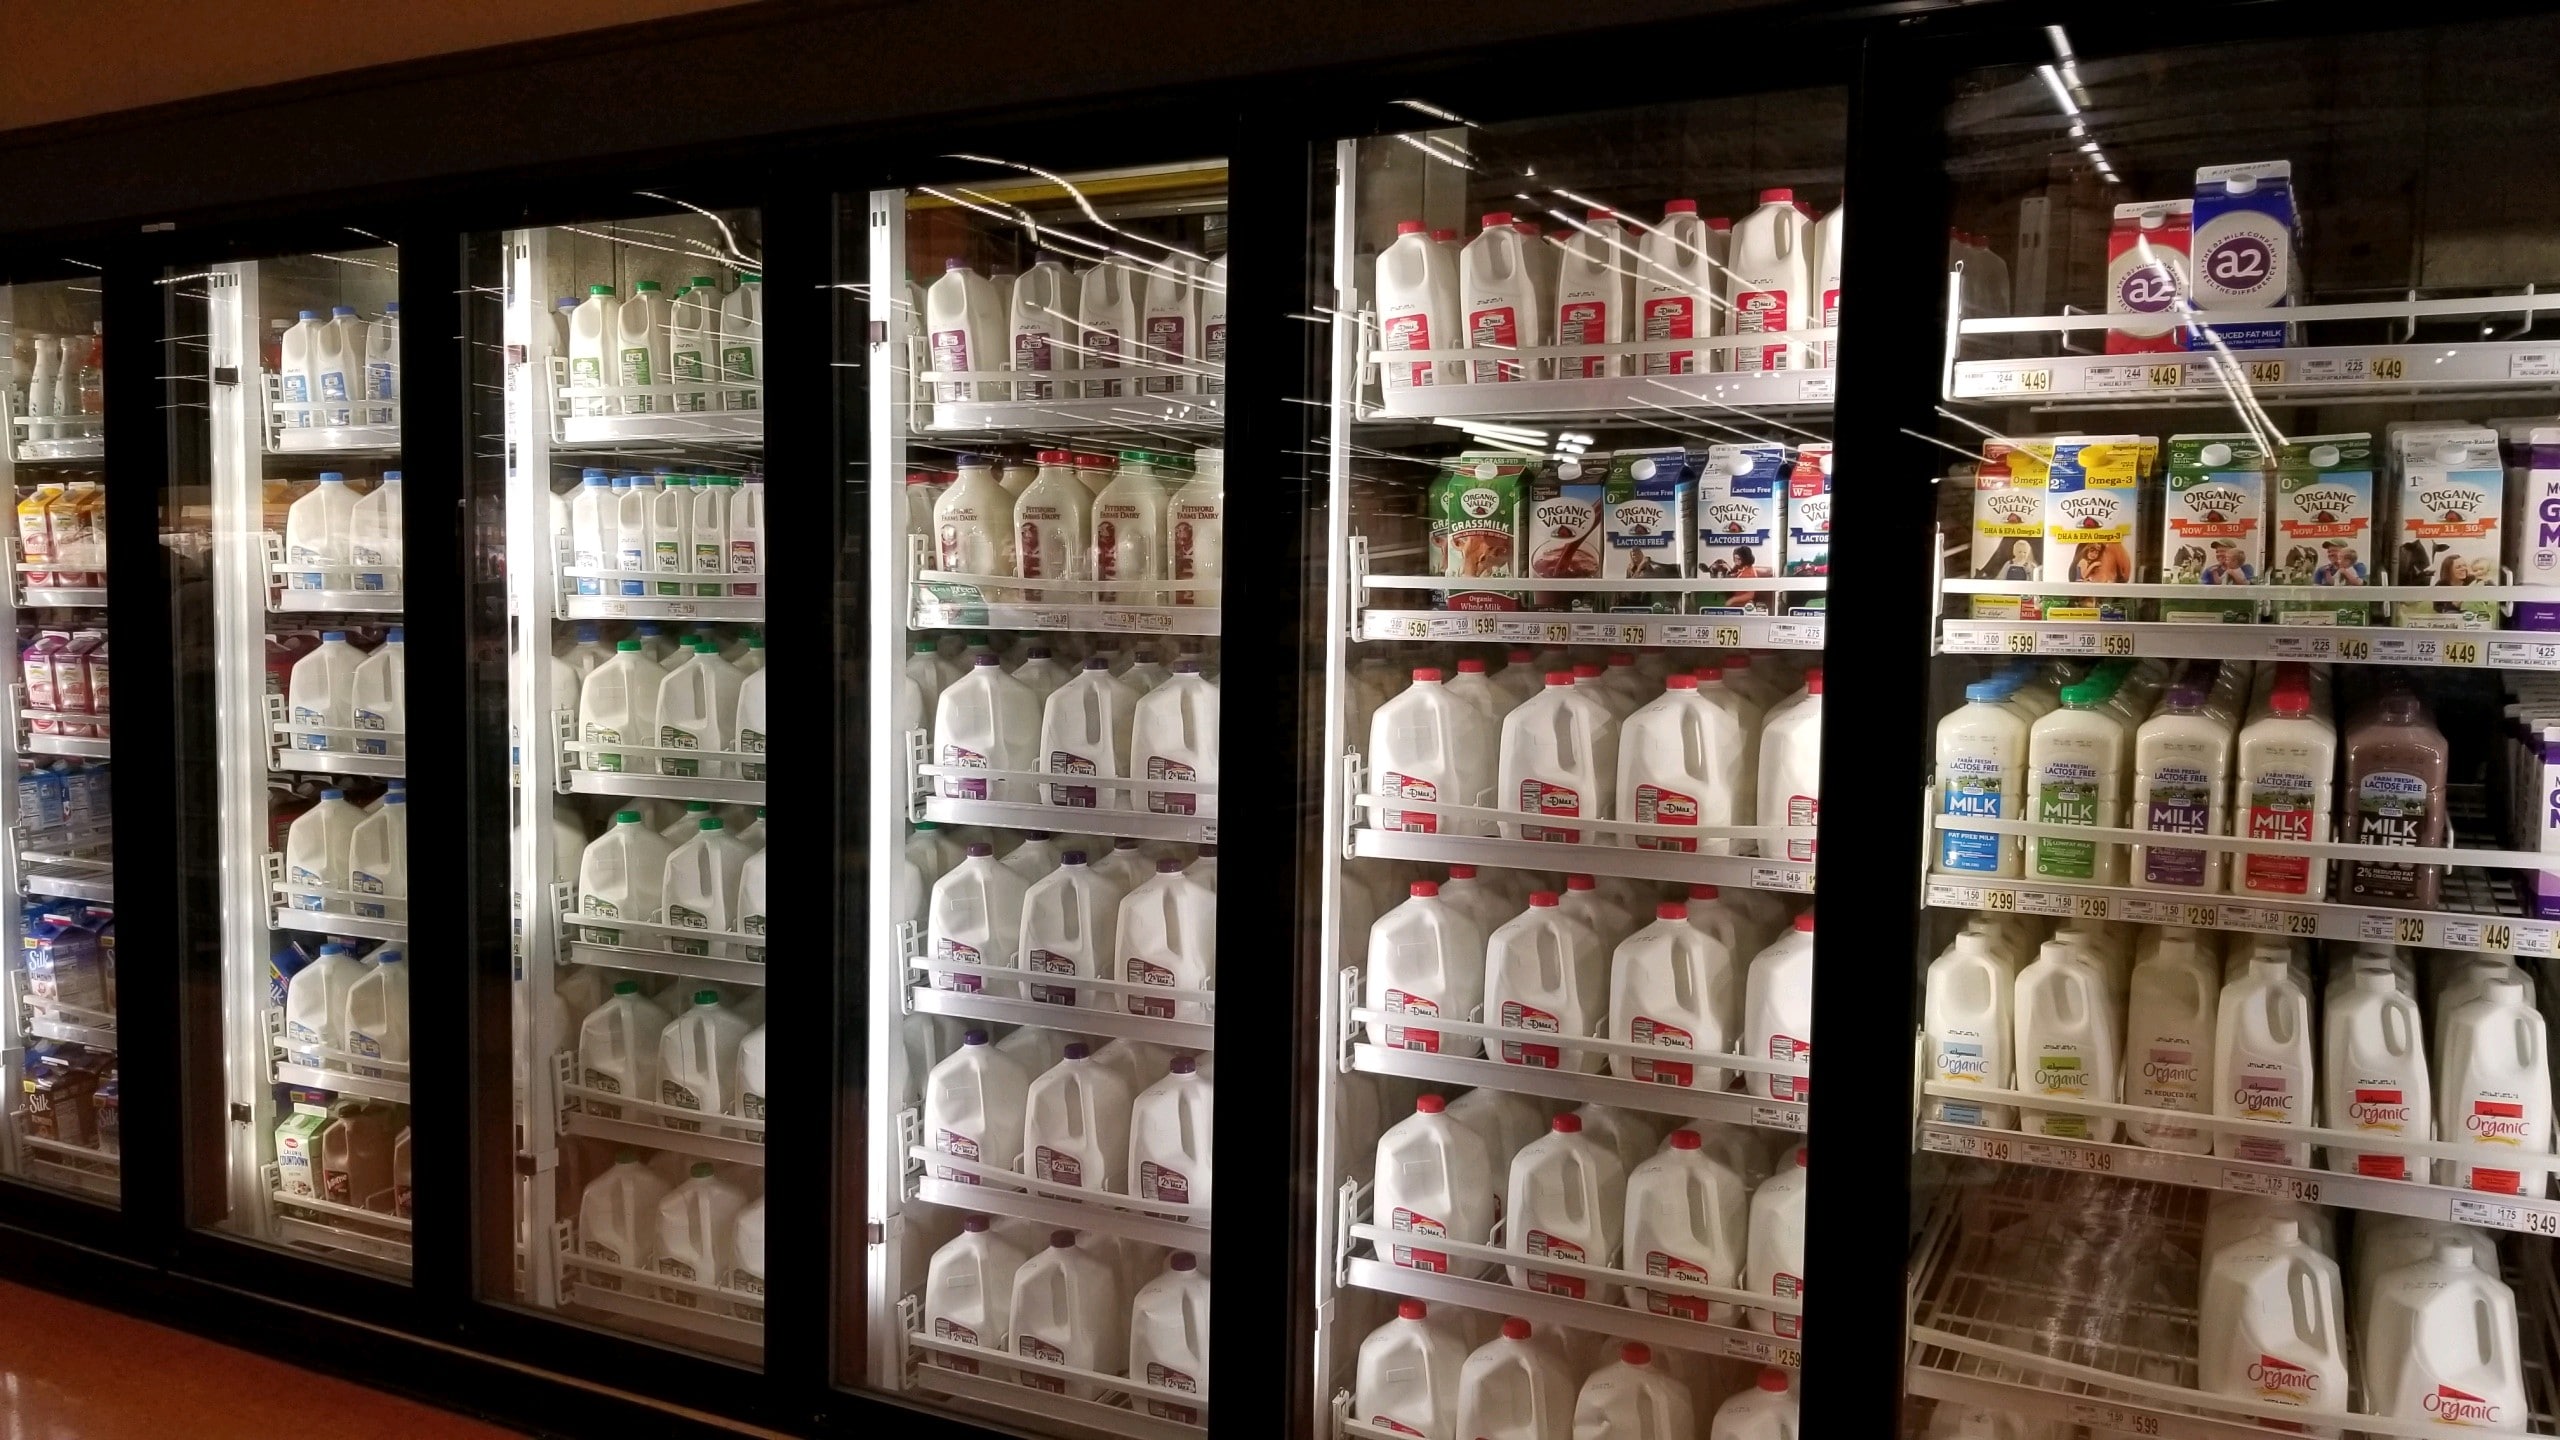 American Dairy Association North East Helps Retailers Keep Milk Available During National Pandemic